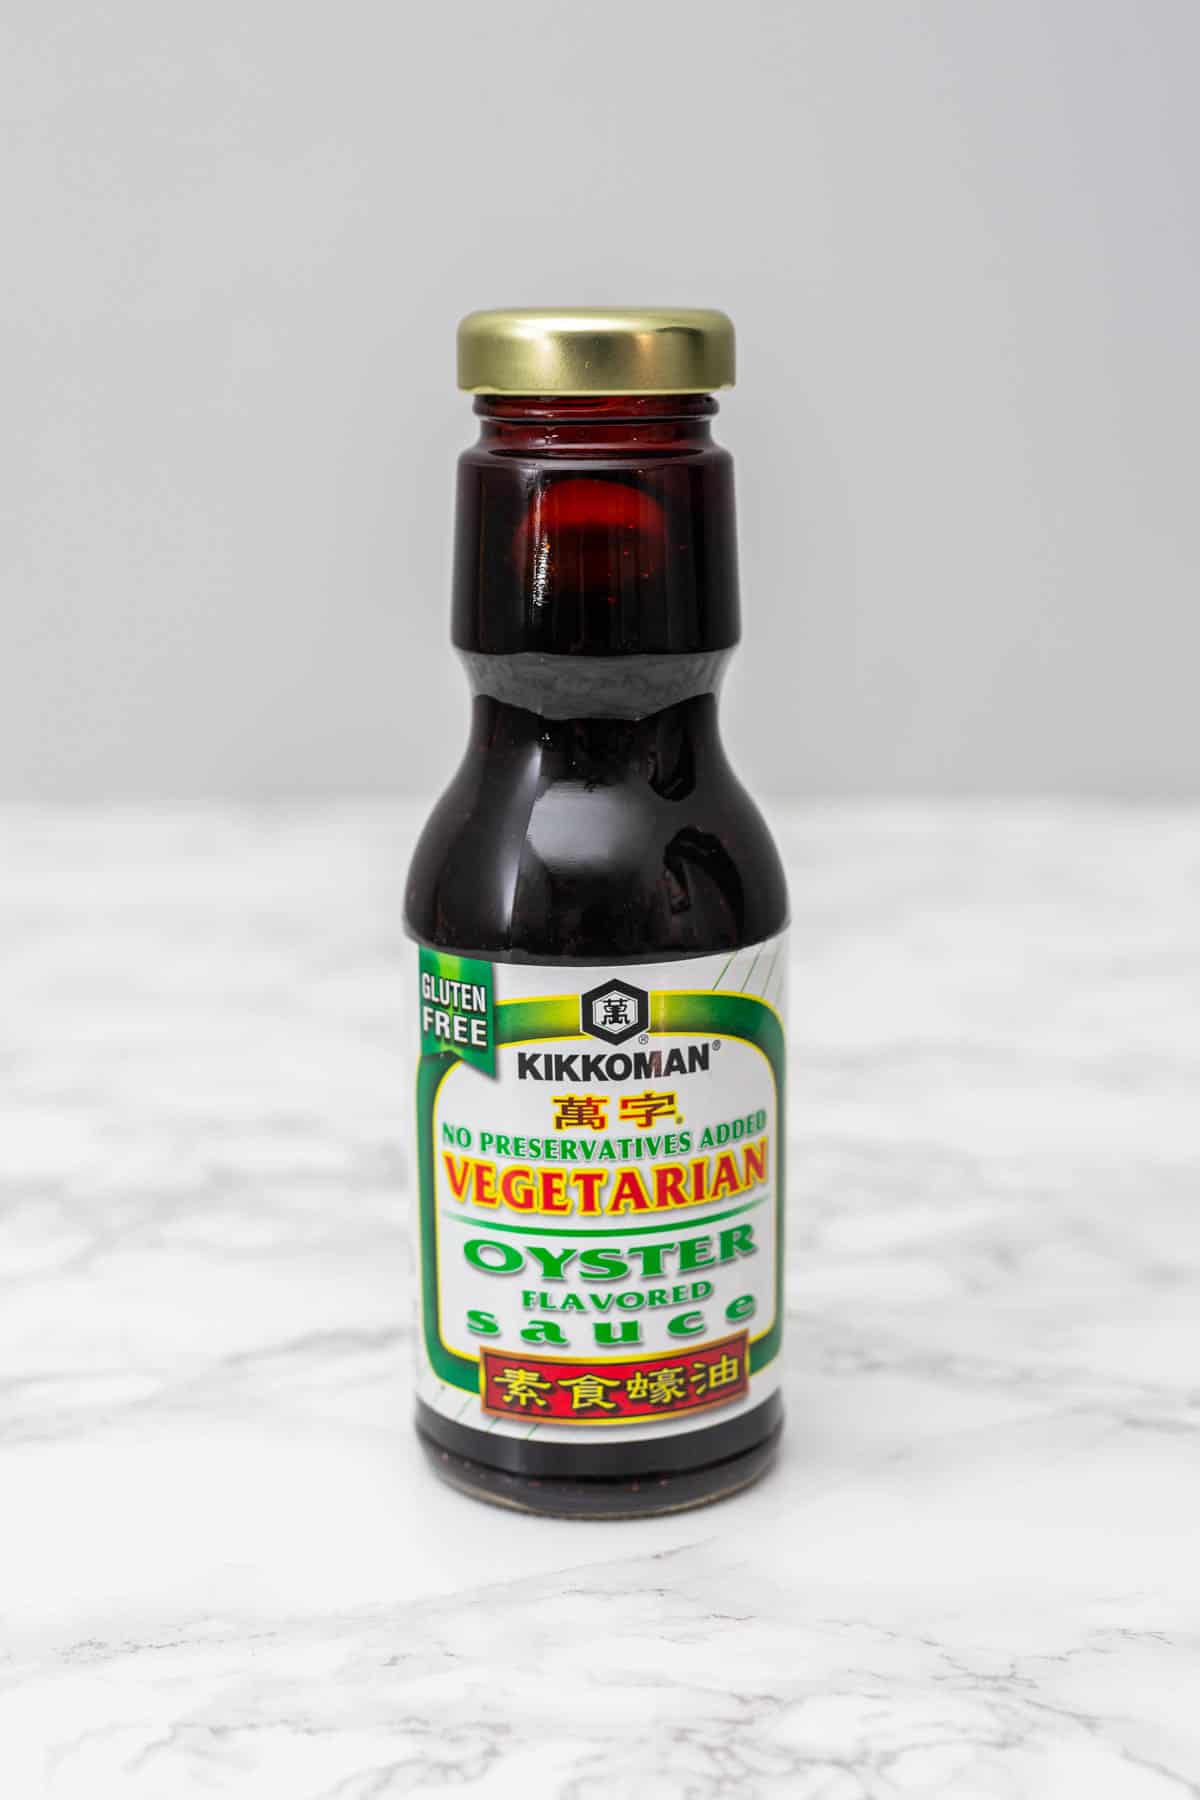 Bottle of Kikkoman Vegetarian Oyster sauce on white marble counter with gray background